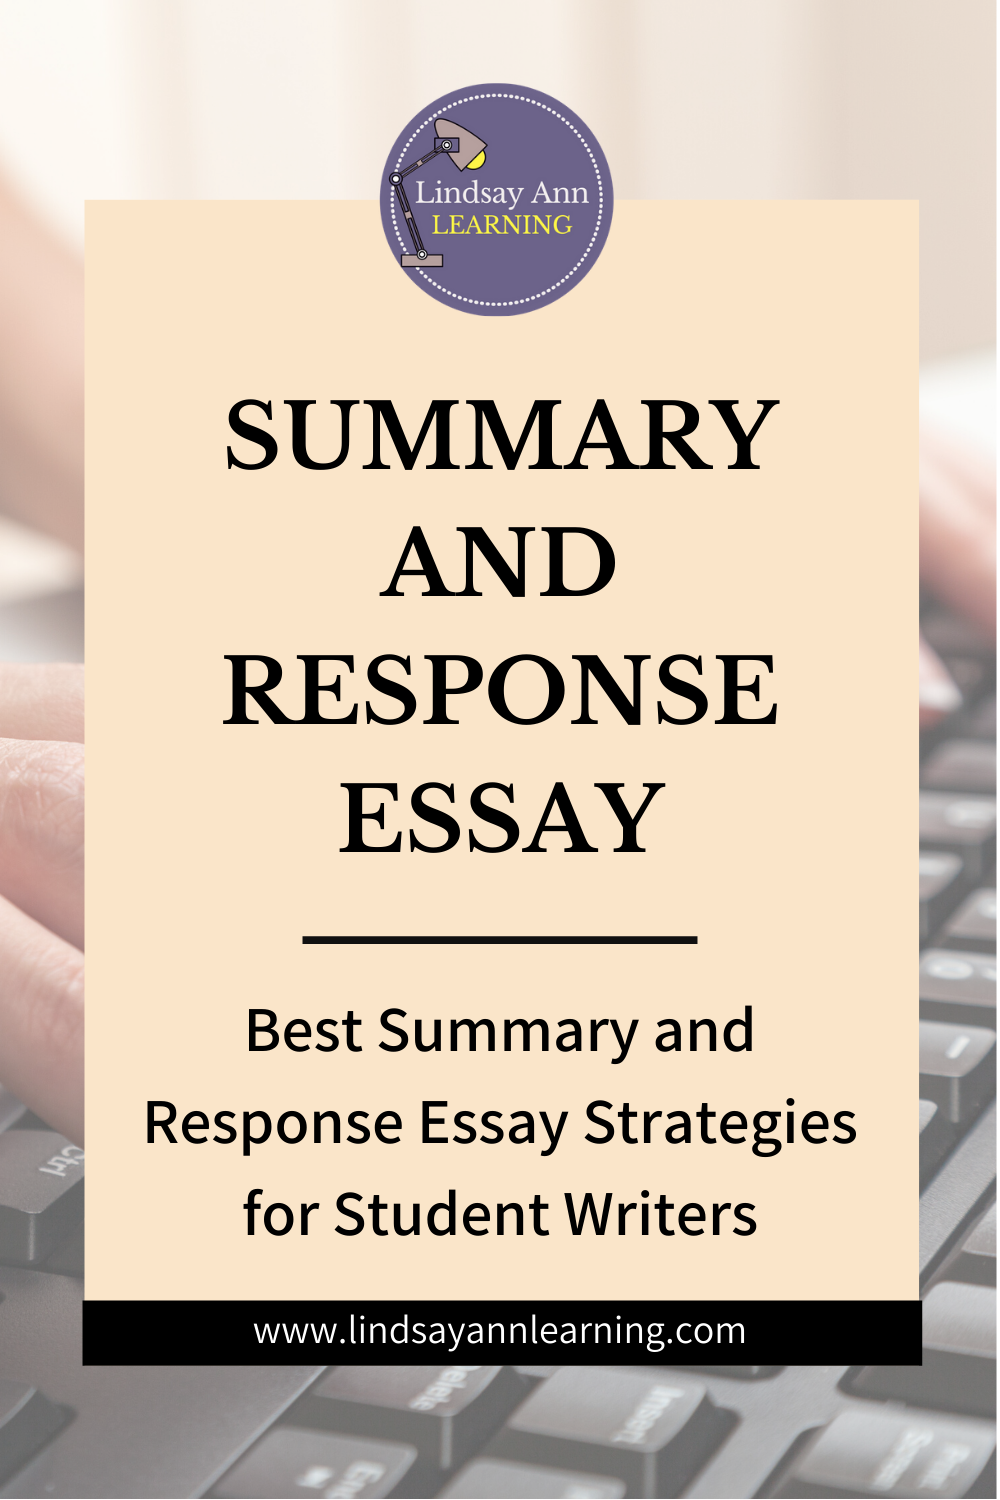 Best Summary and Response Essay Strategies for Student Writers